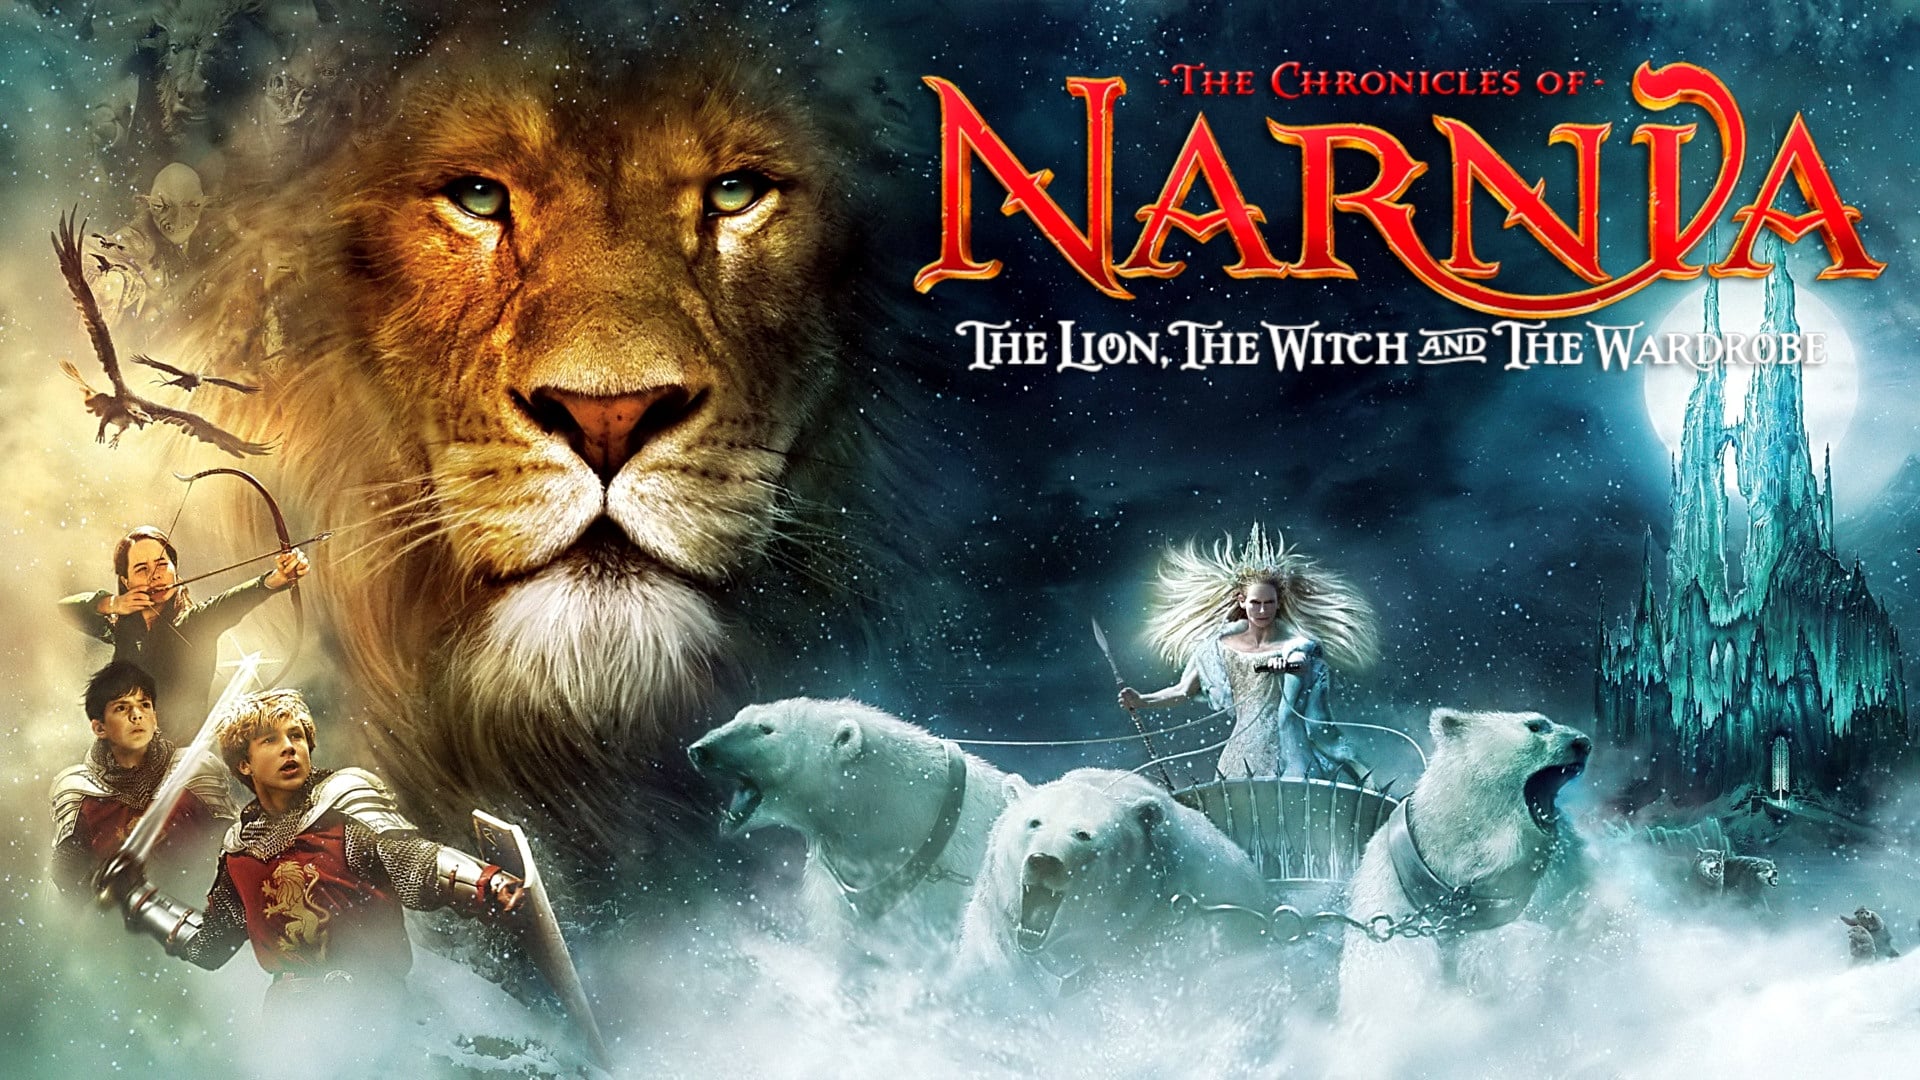 chronicles of narnia audio book tpb torrents